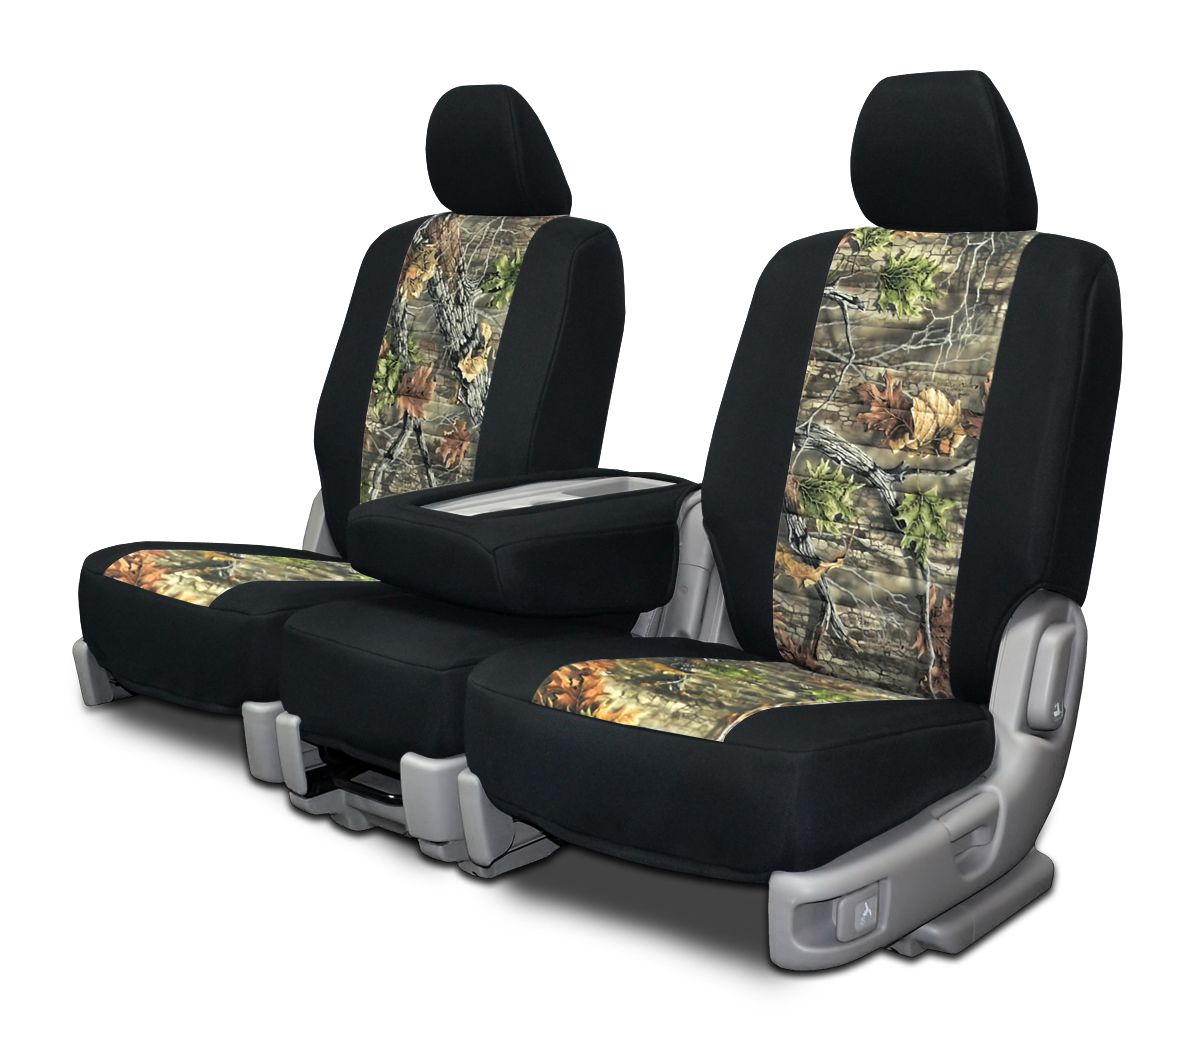 Custom Fit Neo-Camo Seat Covers for Ford F-250 F-350 Truck | eBay